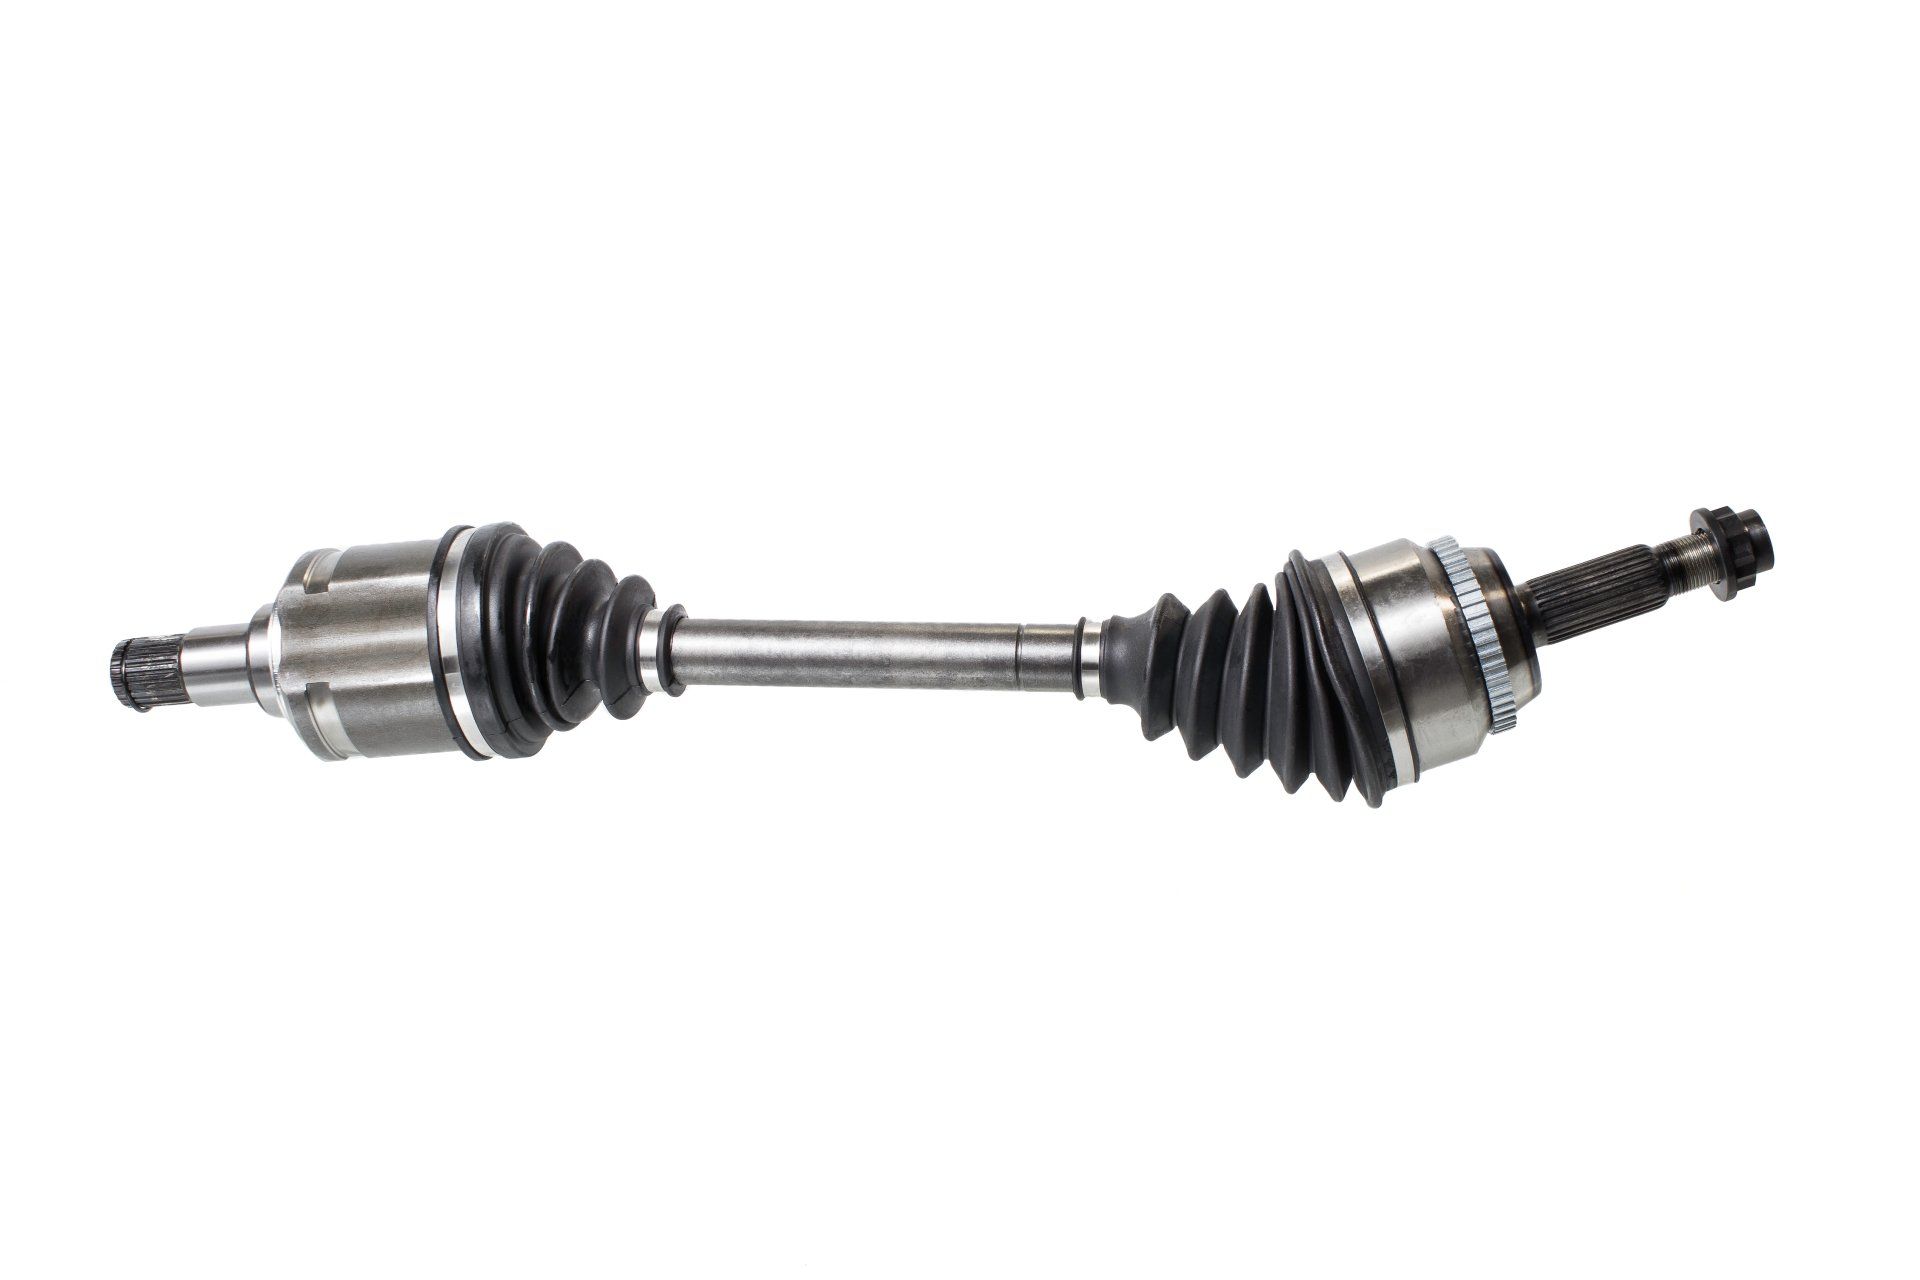 Differential / Cv axle